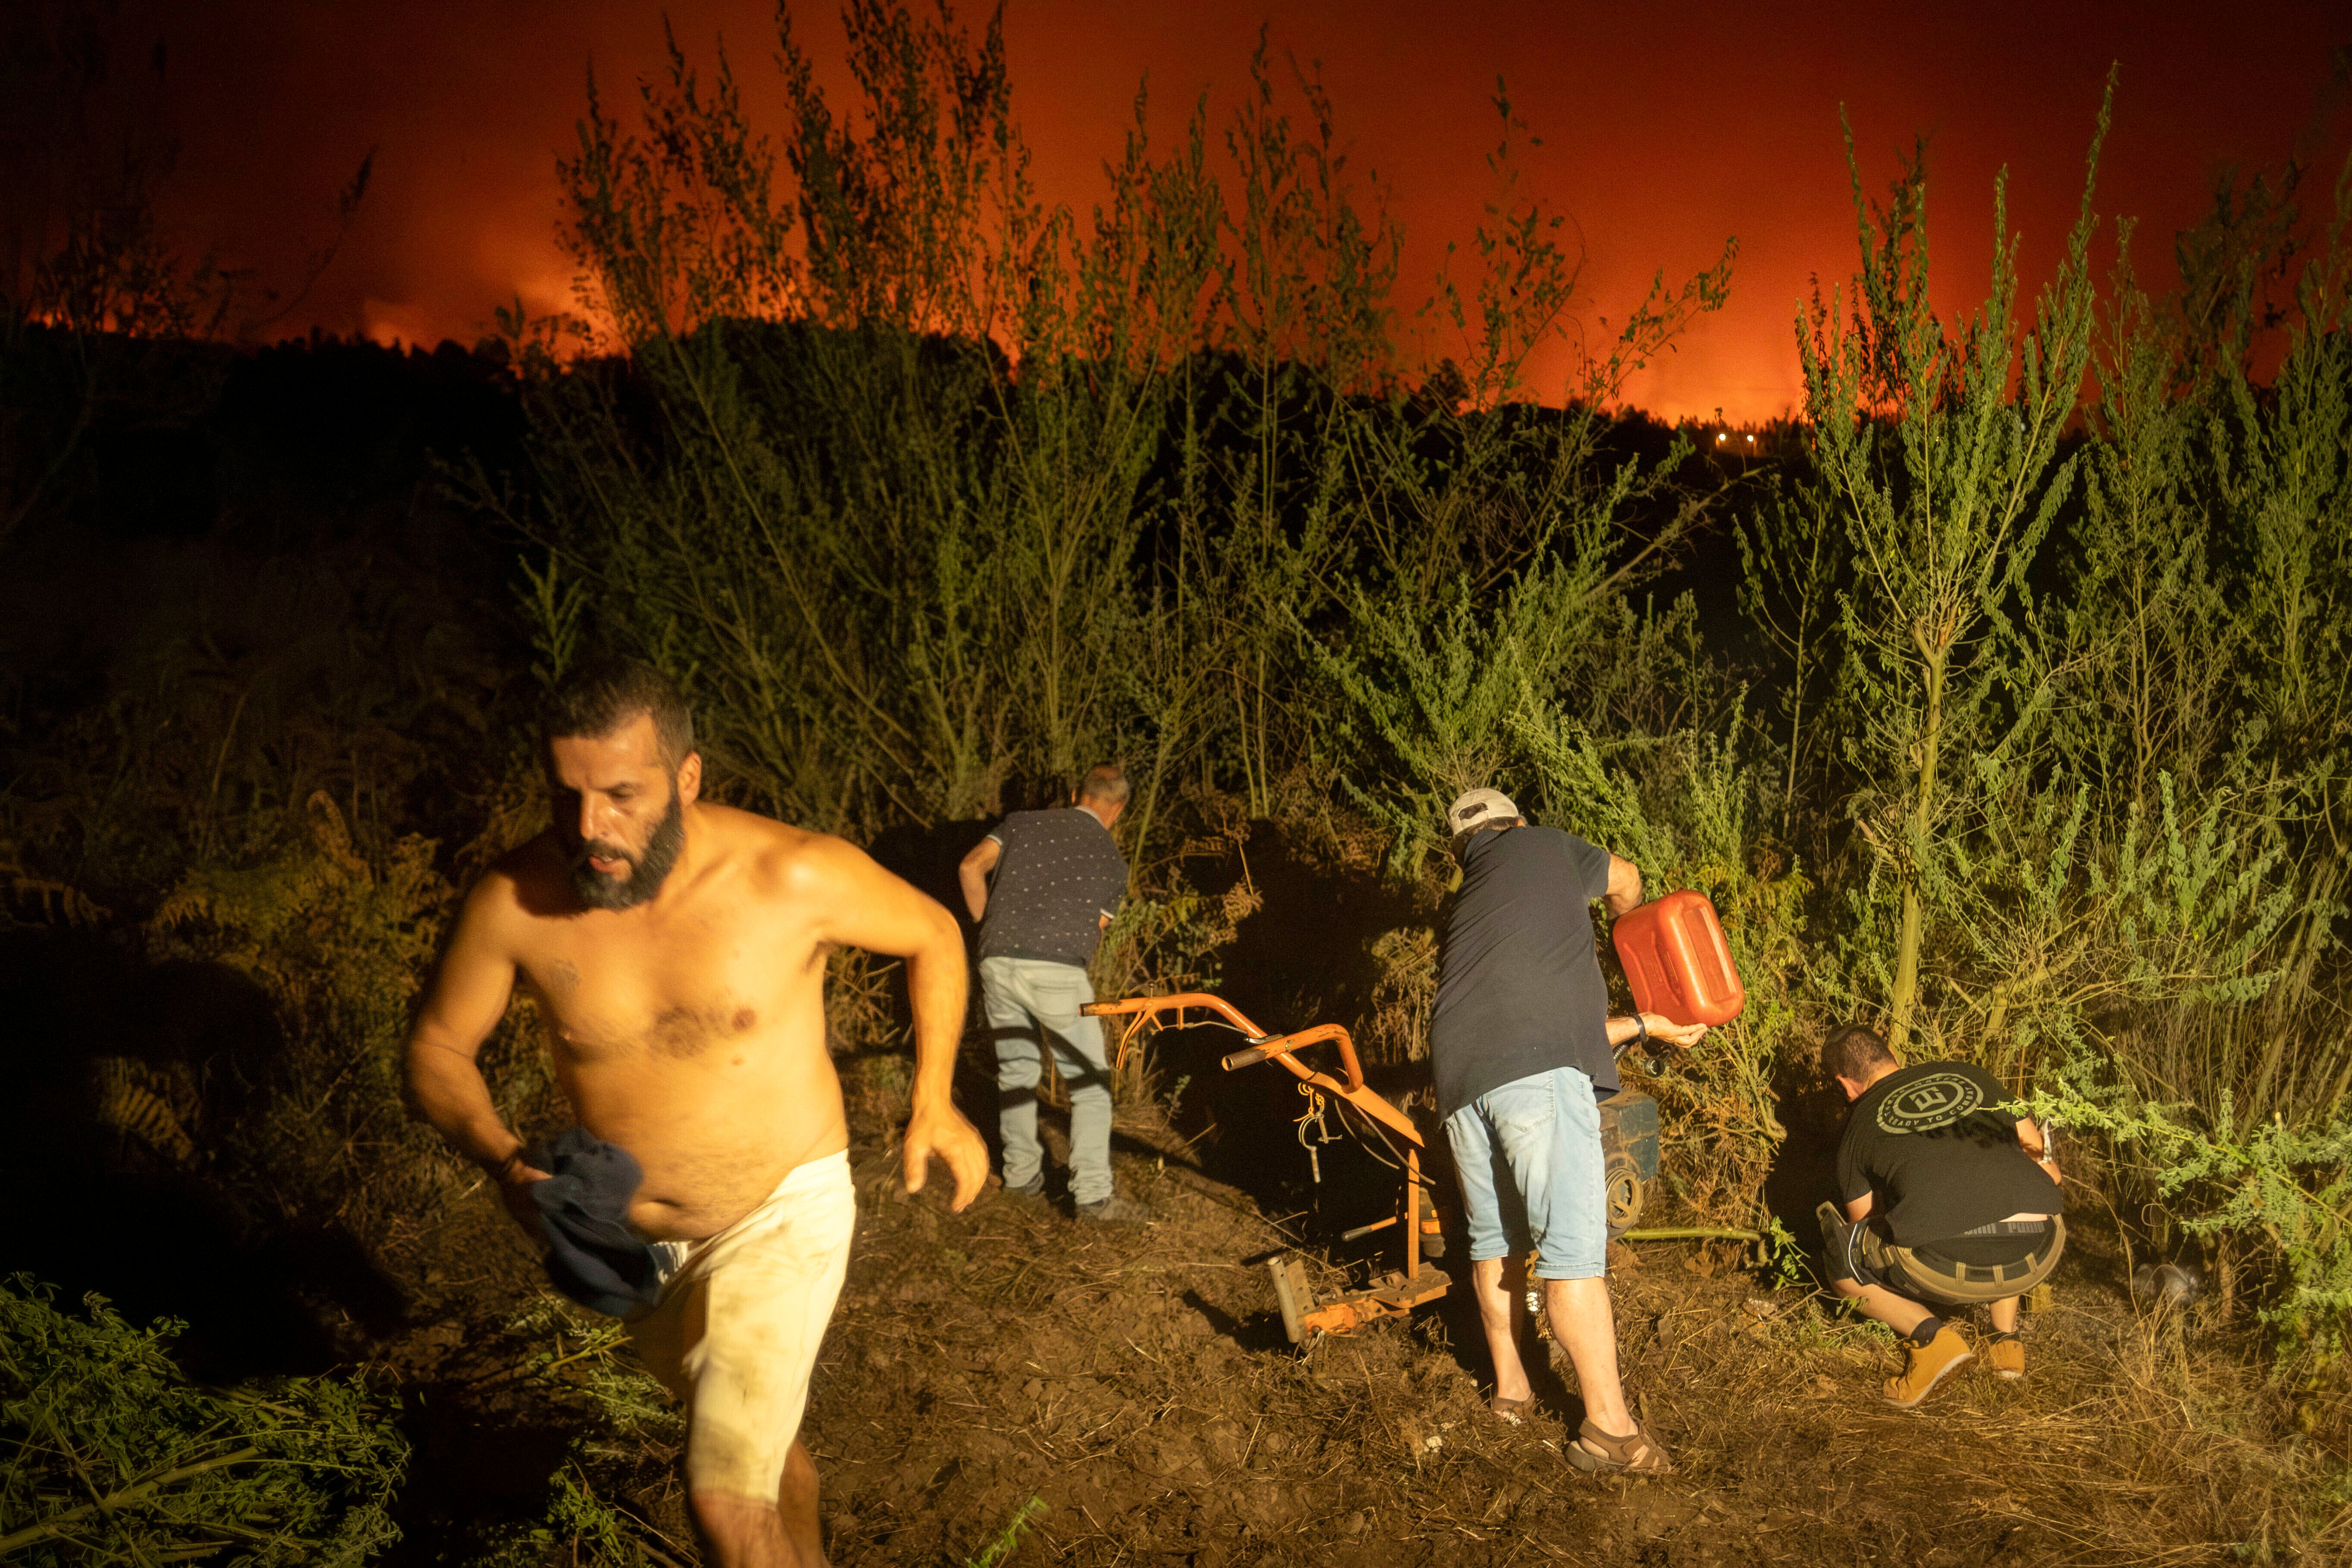 Local residents try to clean the forest to prevent it from flames as fire advances in La Orotava in Tenerife on Saturday